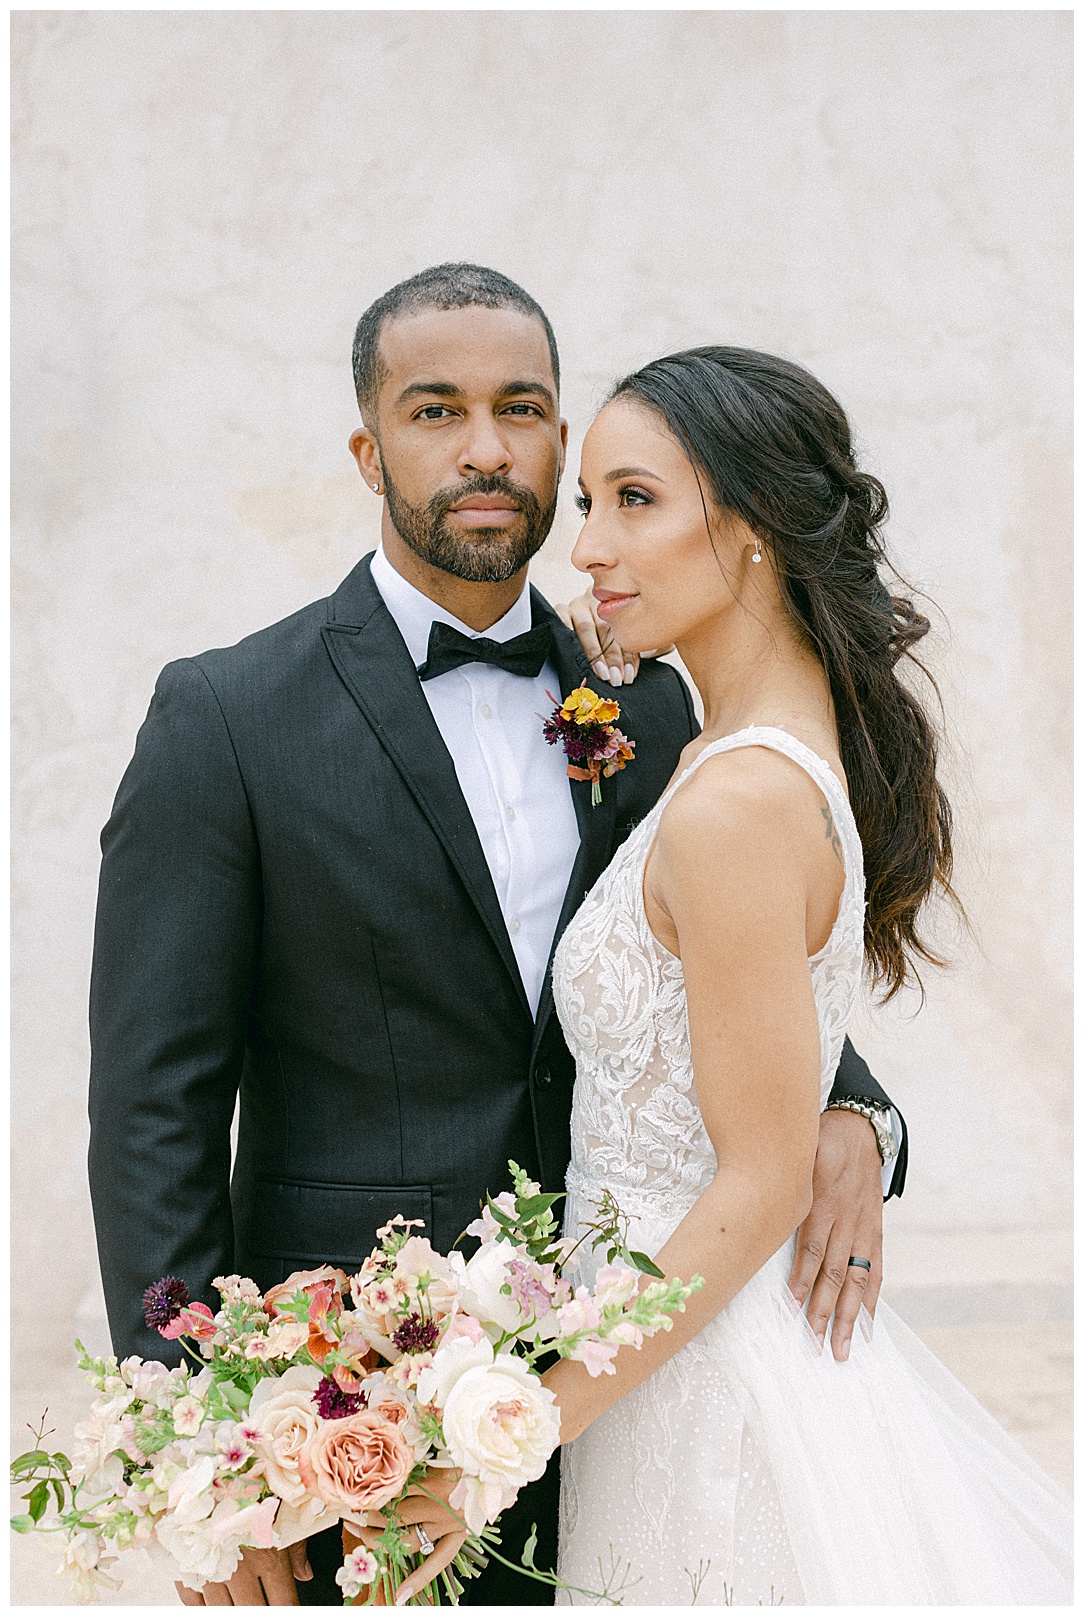 celebrating first anniversary with styled wedding photo shoot